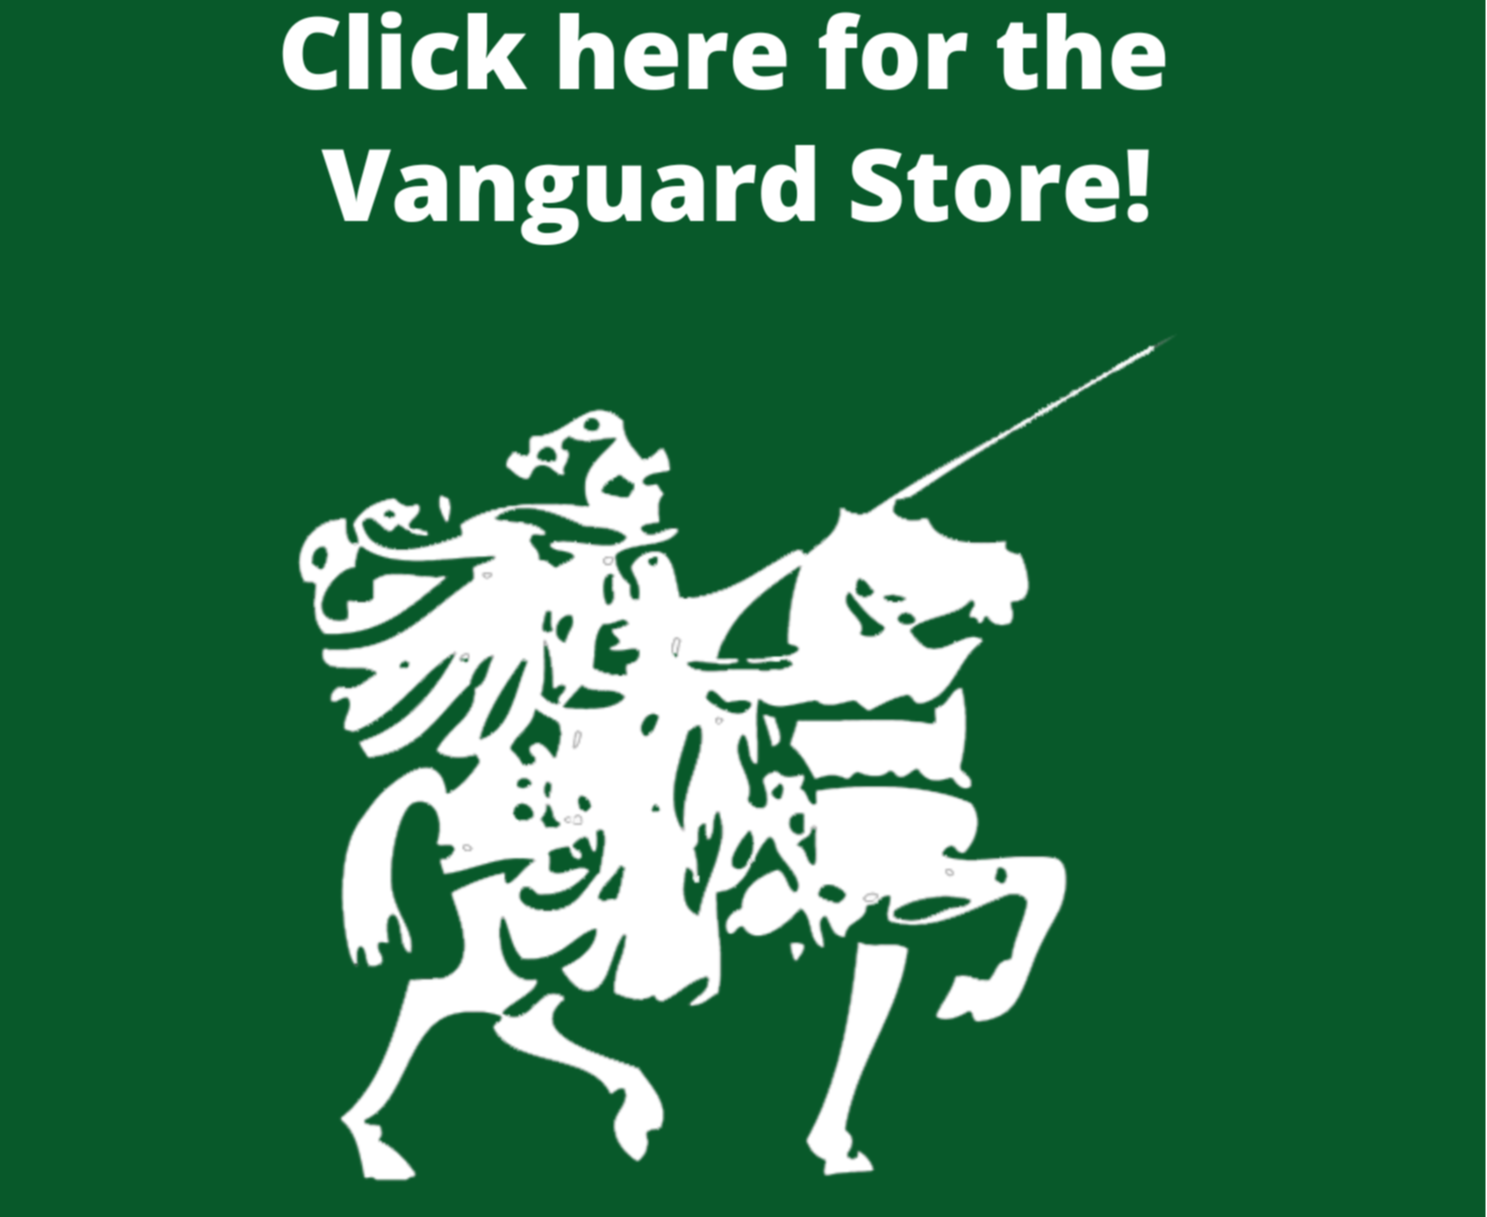 Click here for the Vanguard Store